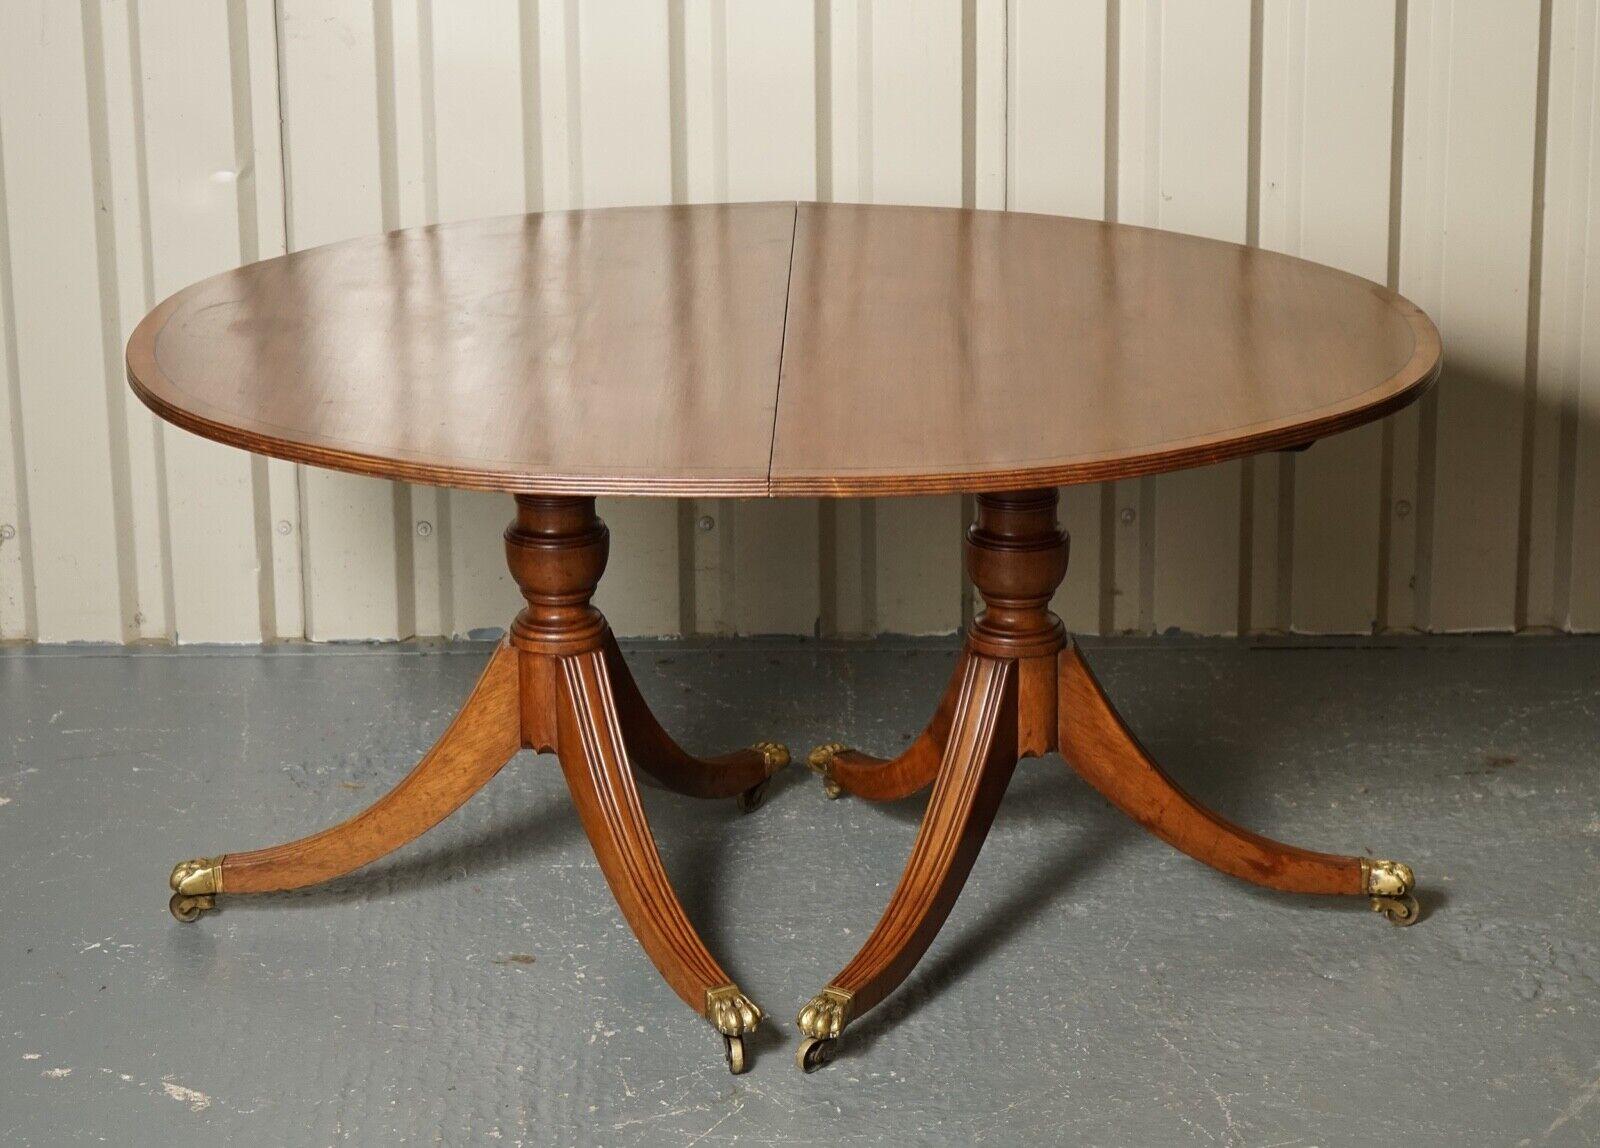 We are excited to present this outstanding Bradley mahogany extendable wood dining table to you.

Very good quality and solid vintage dining table.

It has light scratches over the top which are noticeable by reflection mostly.

We have